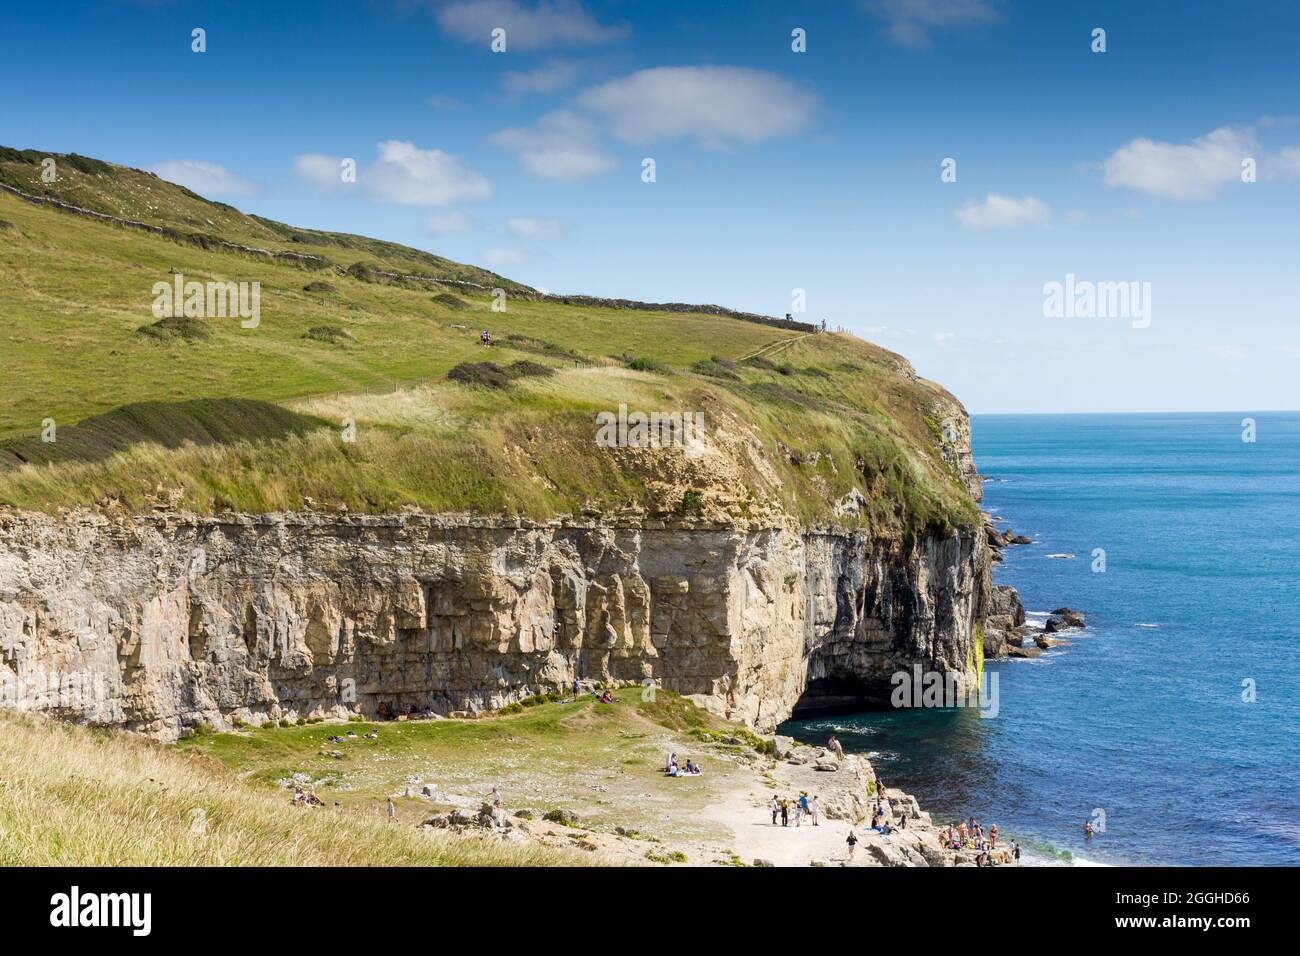 View of Dancing Ledge at Spyway, Dorset, on the Jurassic Coast, England Stock Photo